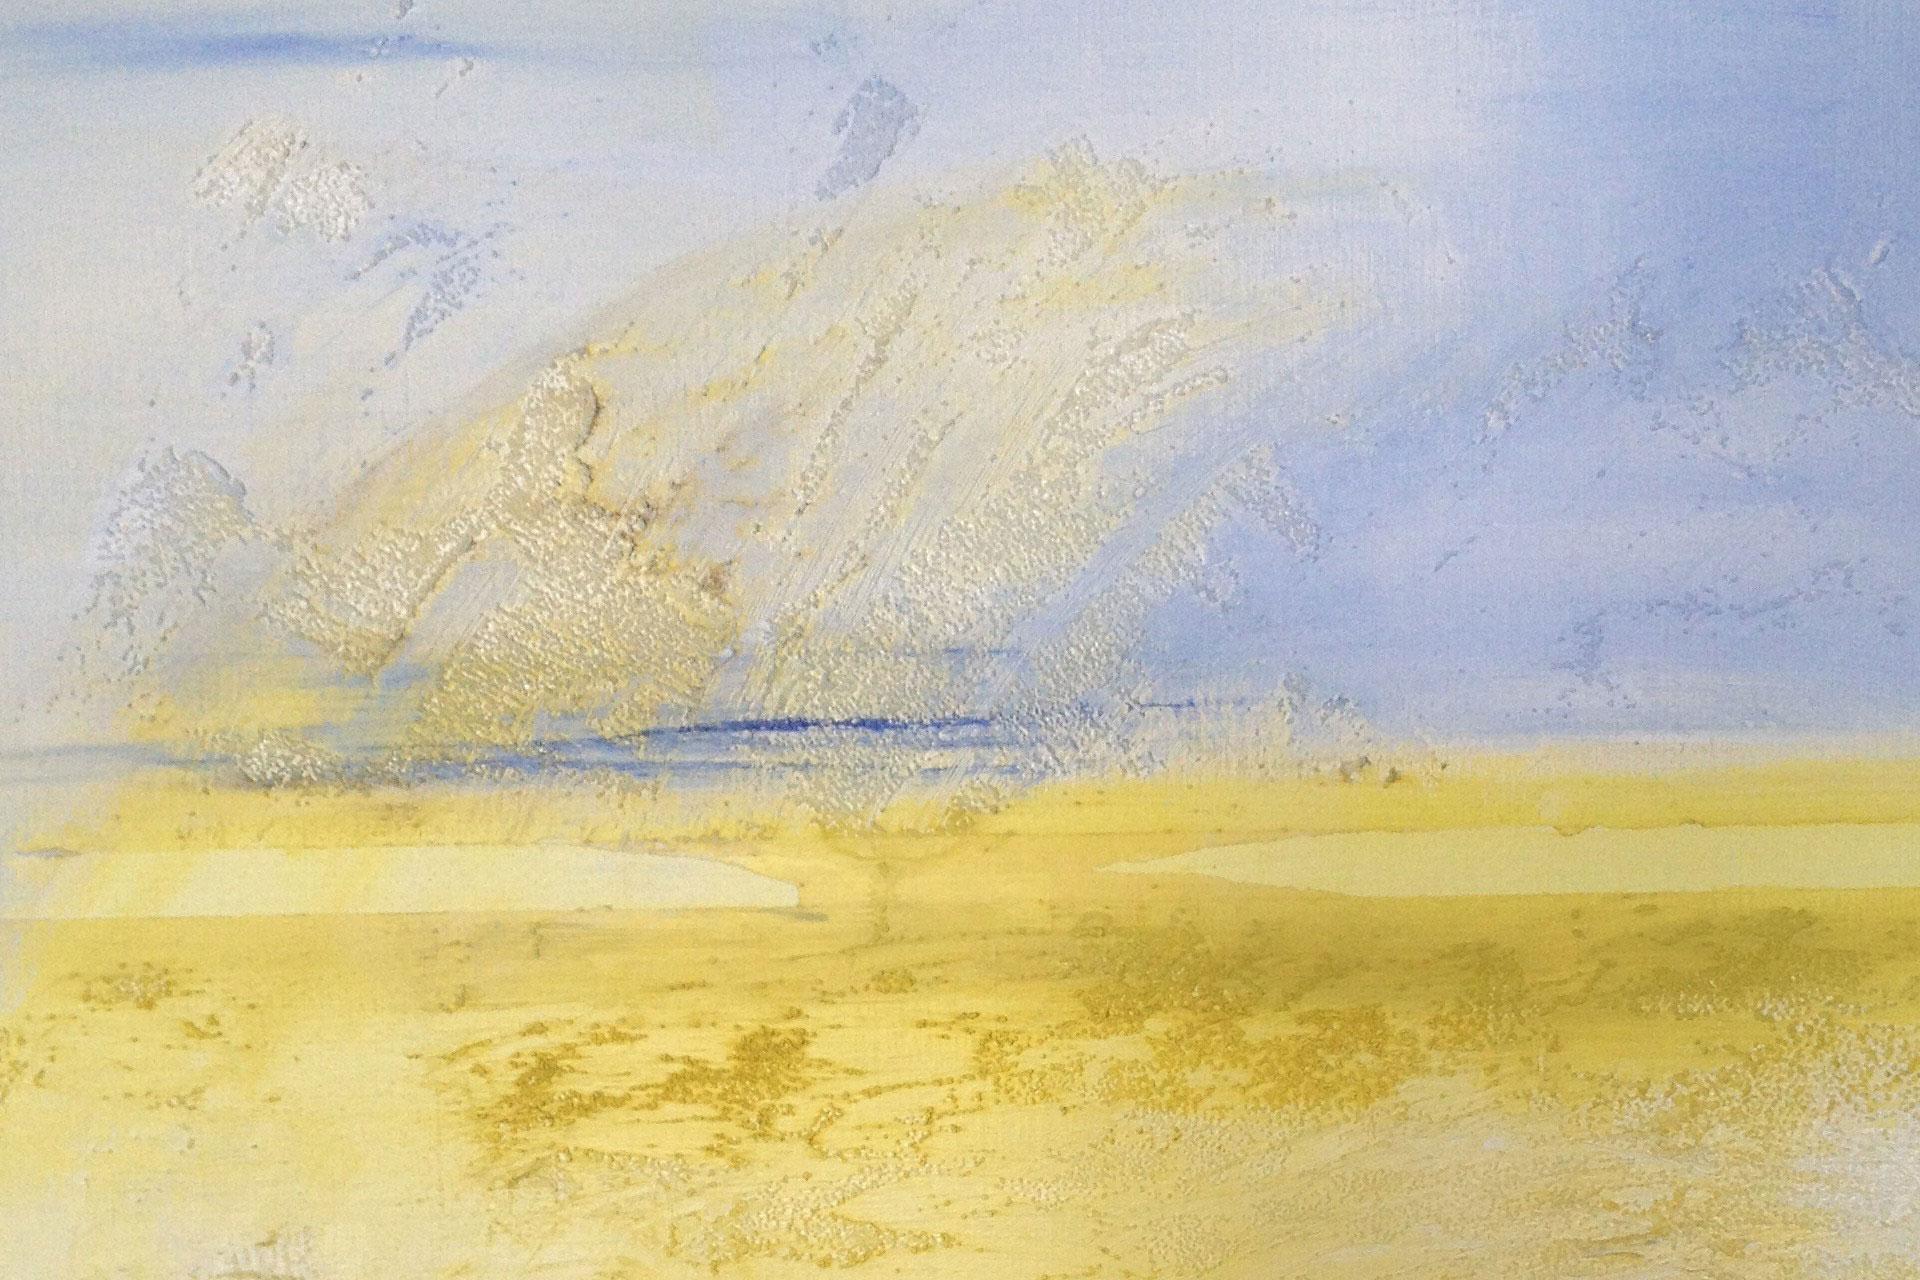 Brighart is a Dutch painter of abstract art: Title of this soft yellow/blue artwork is Neverland